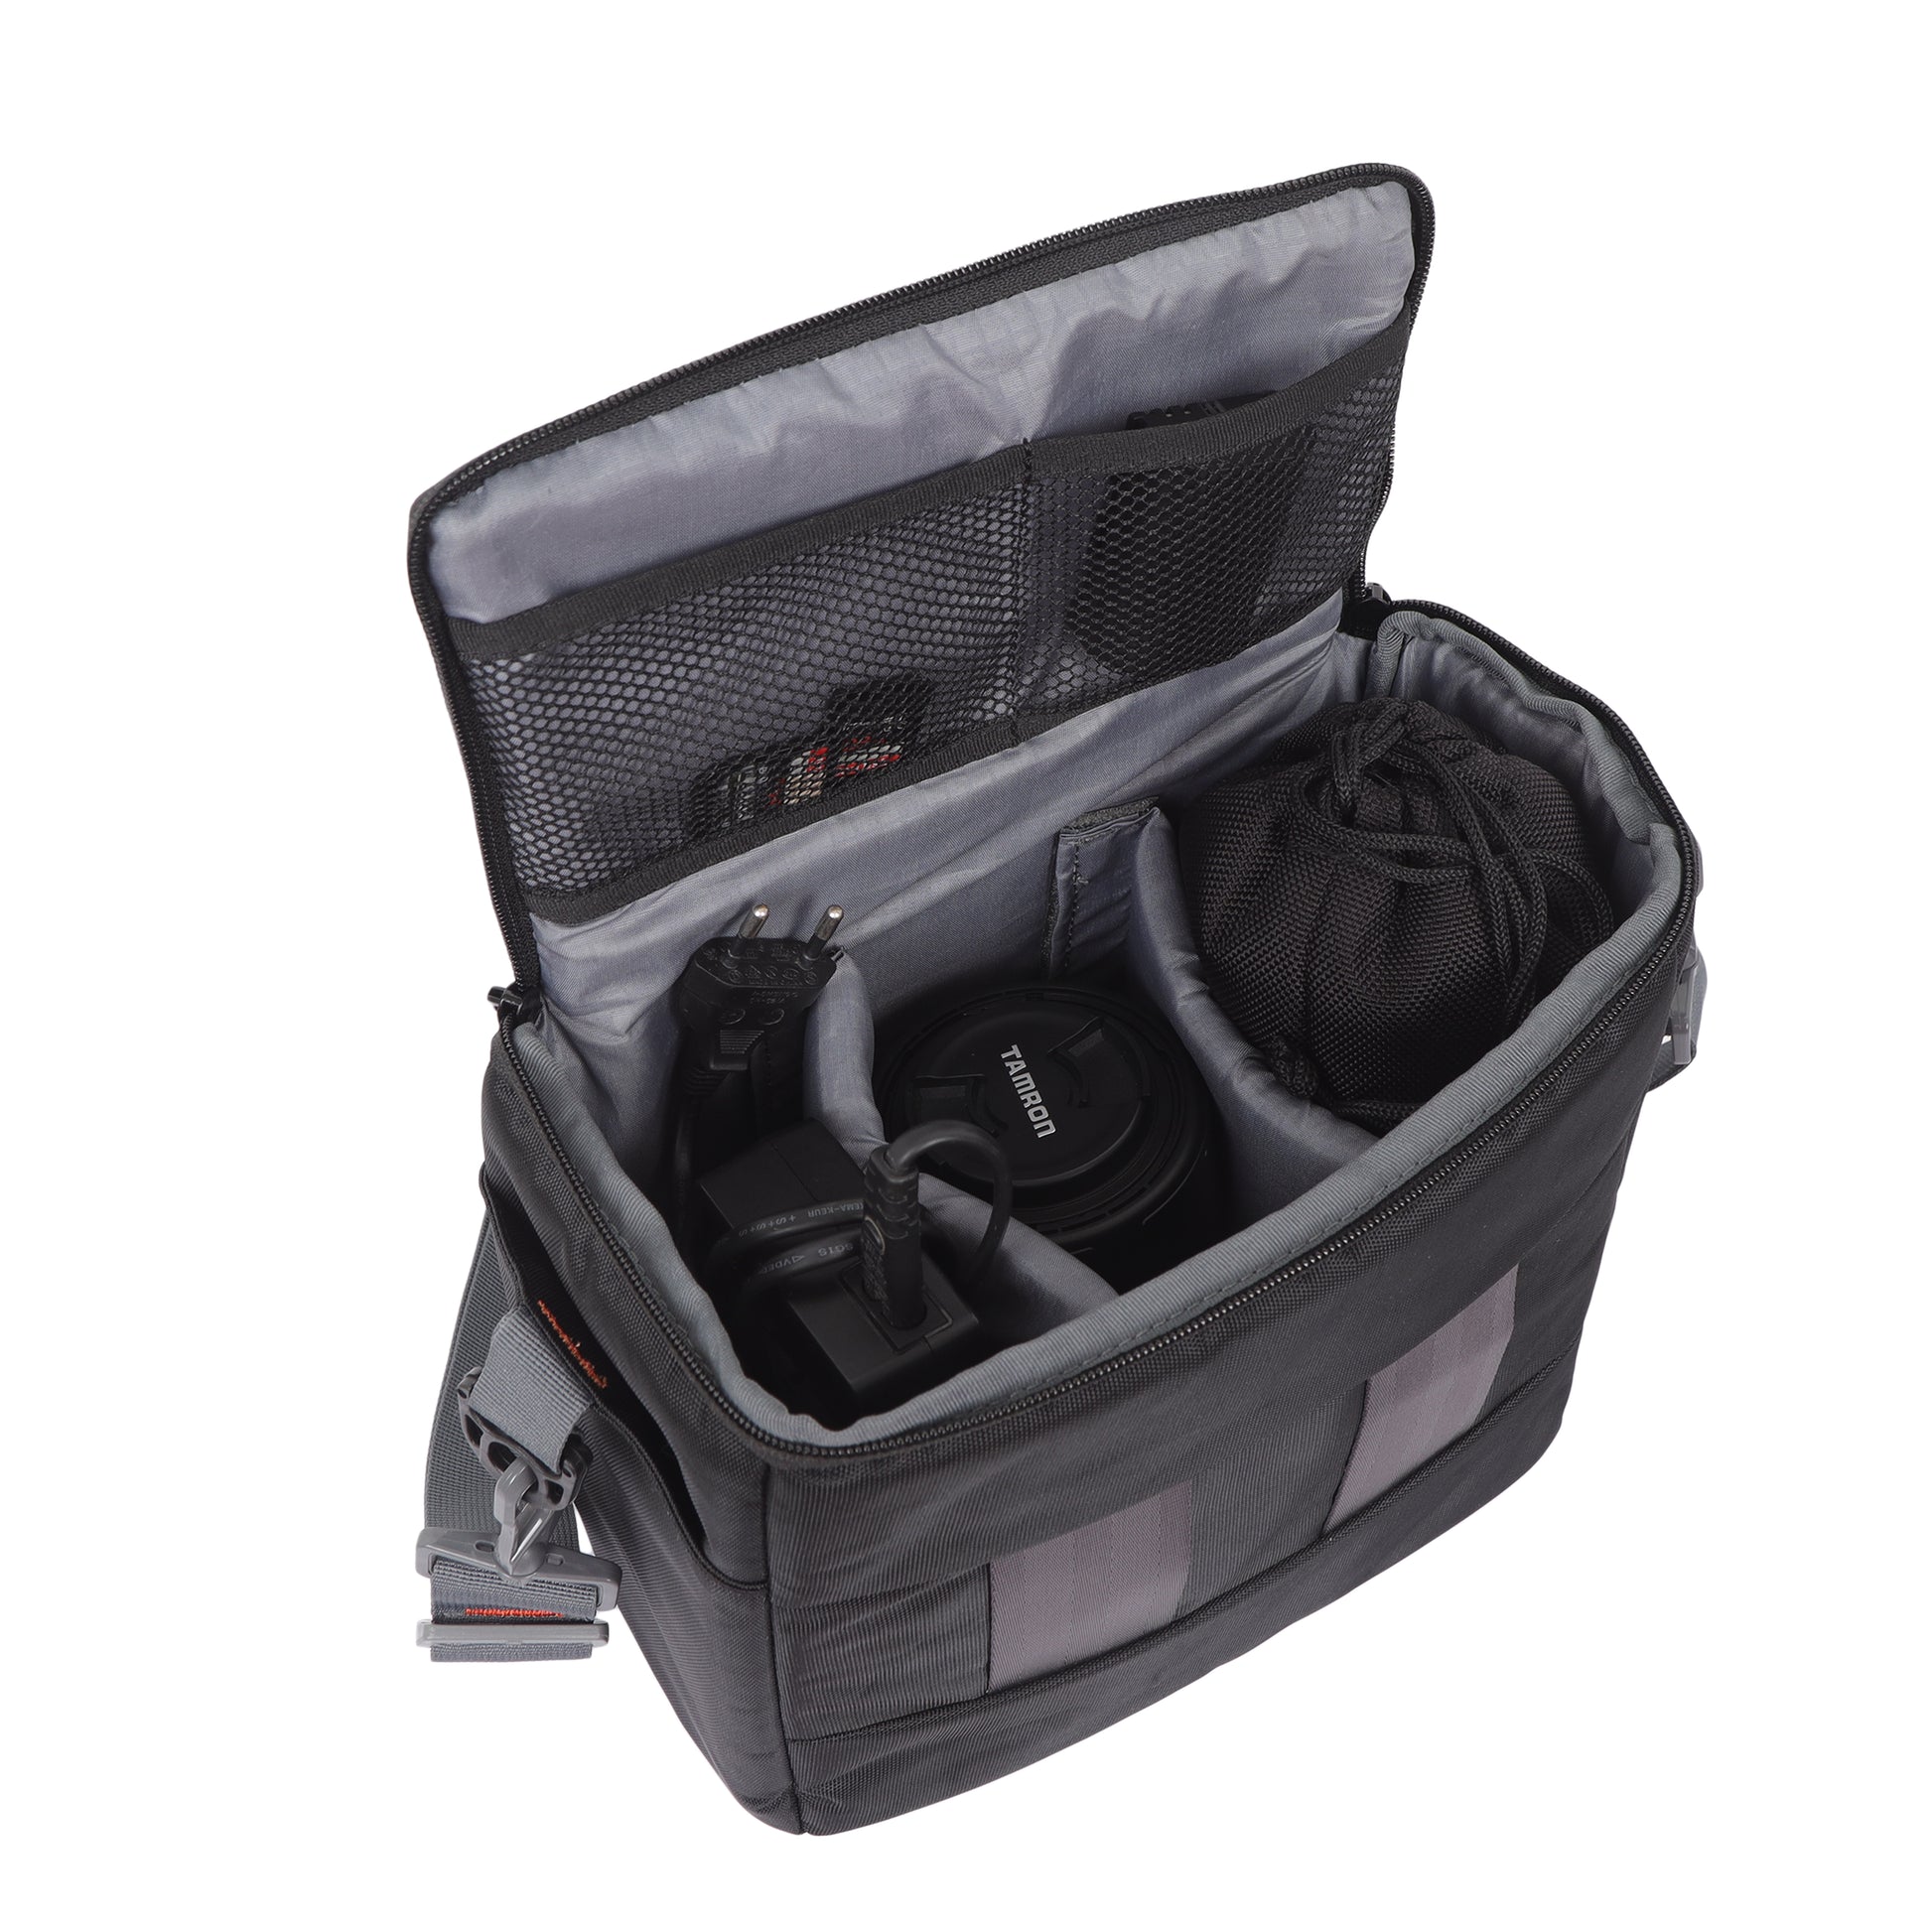 Image: Top 45-degree view of the G16 PNX Pro sling camera bag, revealing an open configuration with a camera body, lens, flash, and various accessories neatly arranged inside. The bag's versatile compartments and customizable dividers allow for efficient organization, ensuring easy access to your essential gear during photography sessions.